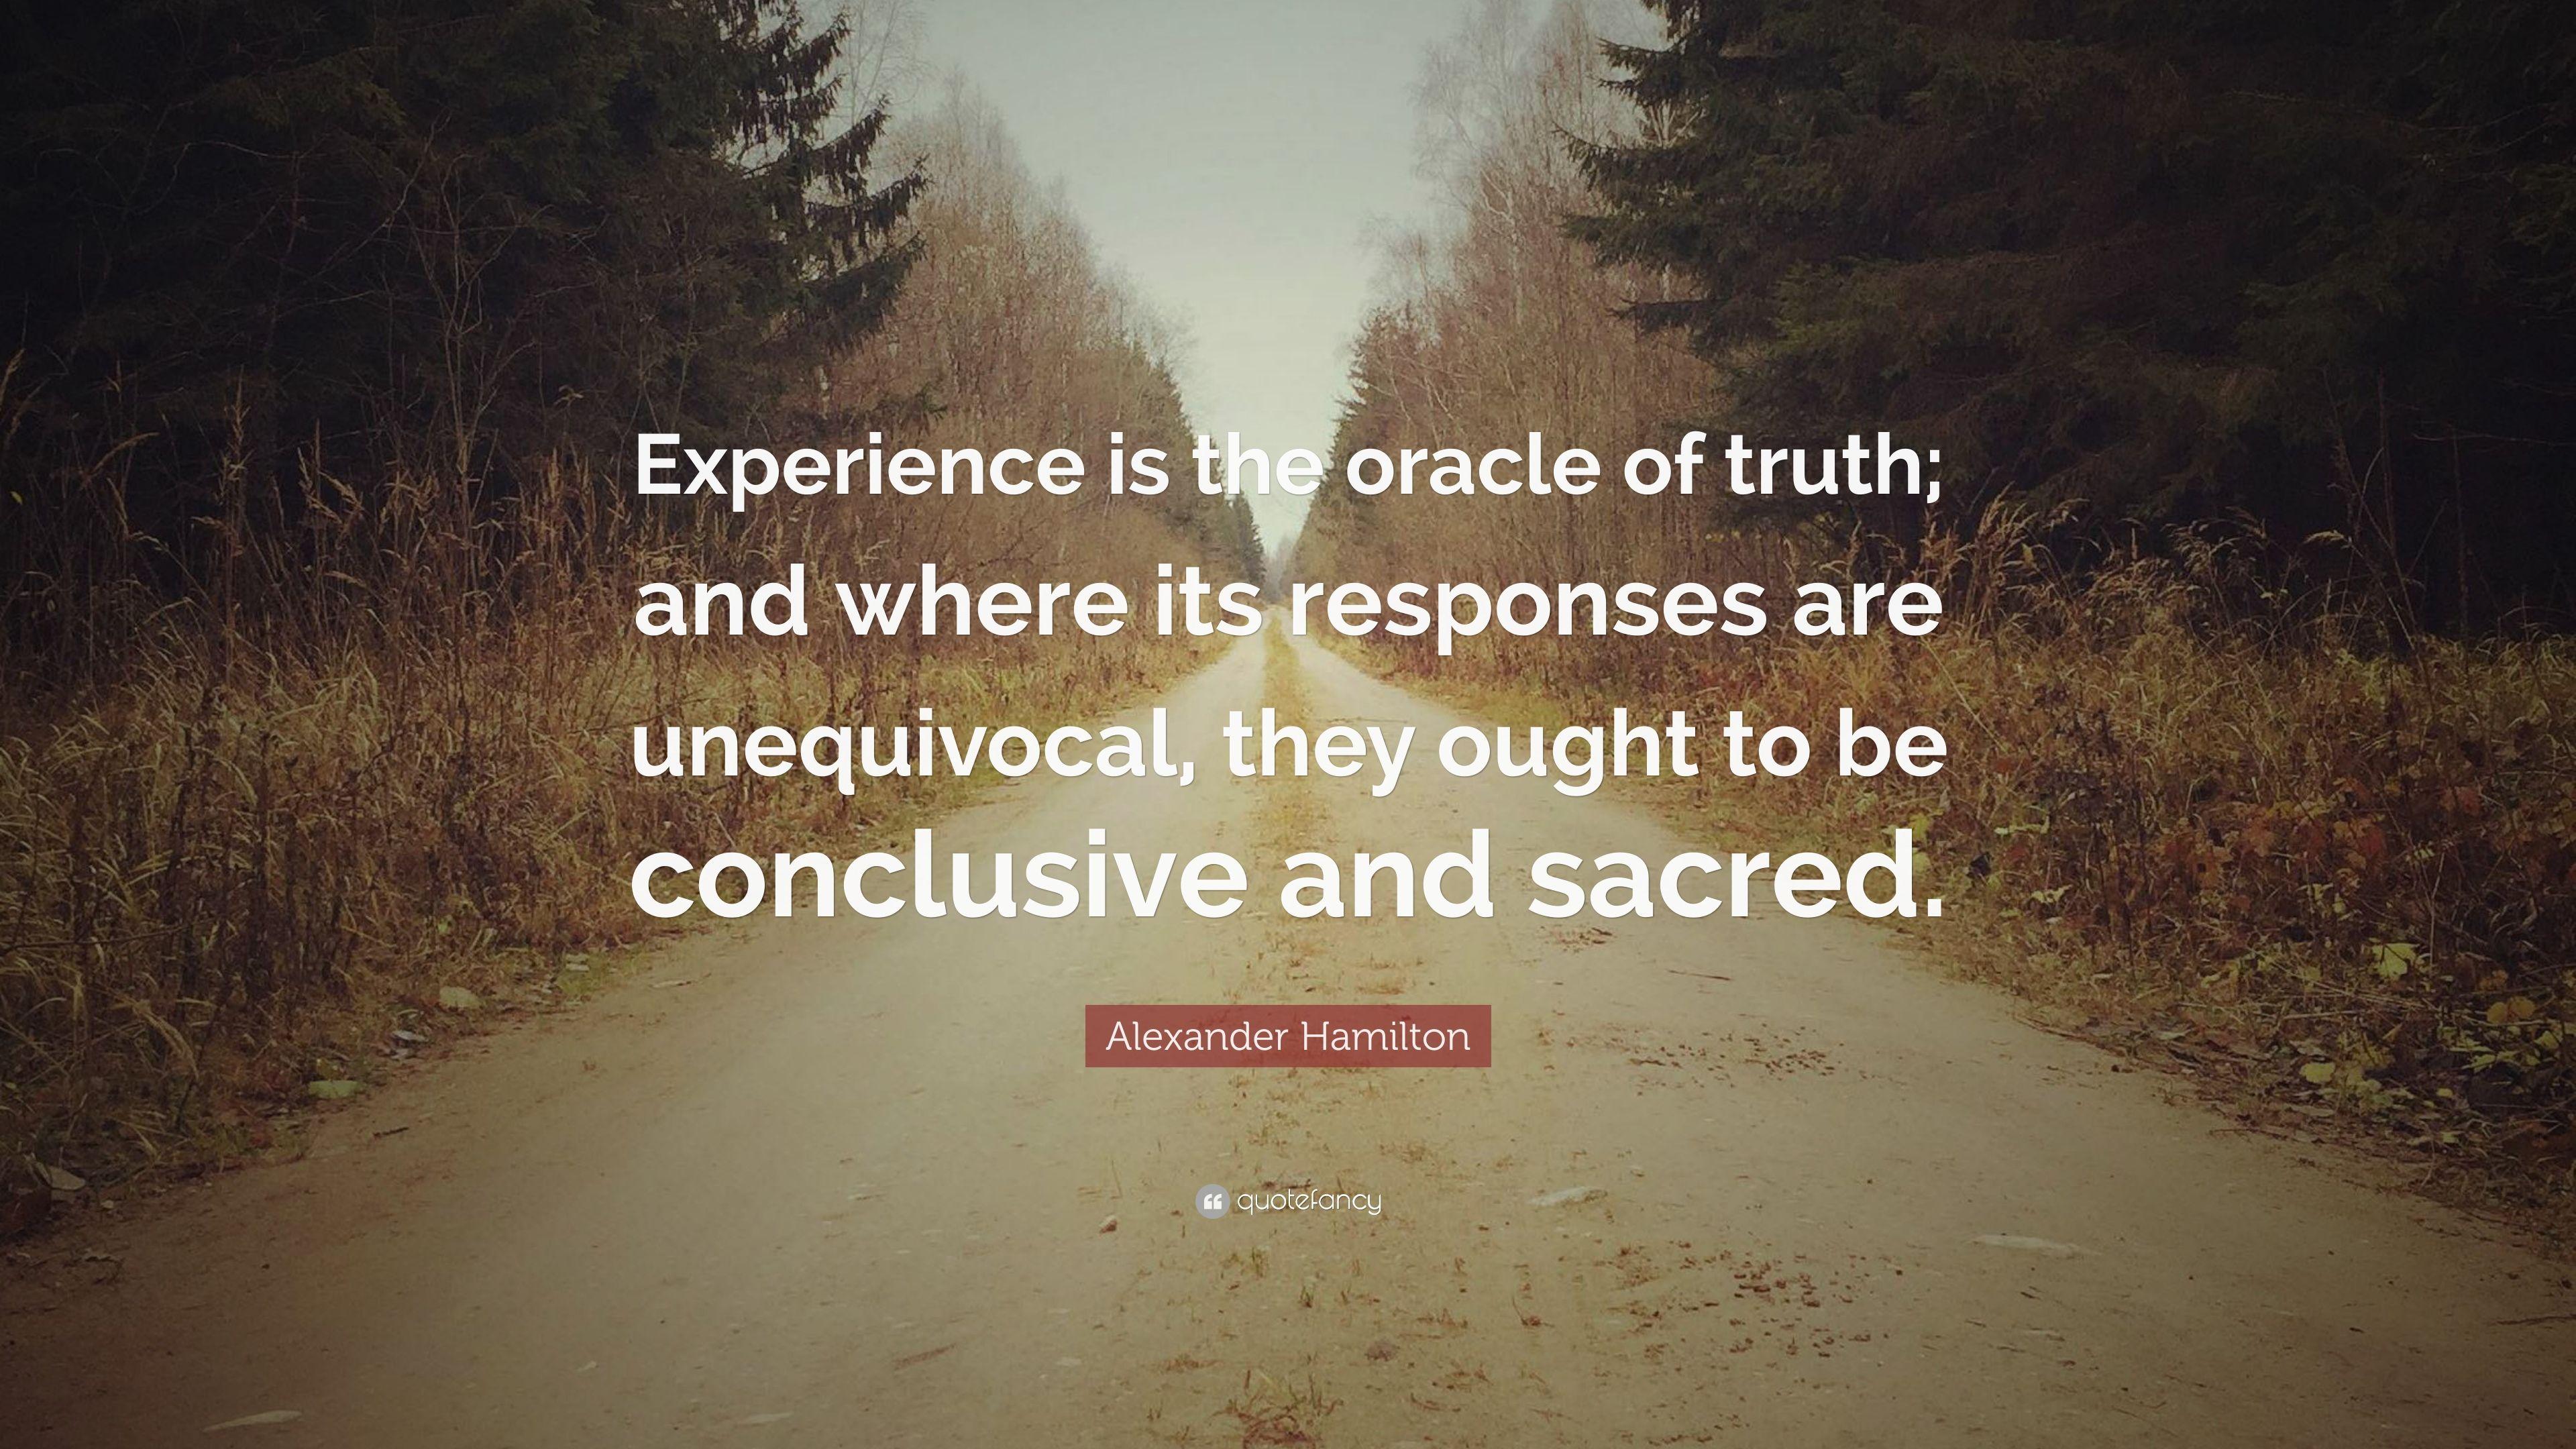 Alexander Hamilton Quote: “Experience is the oracle of truth;